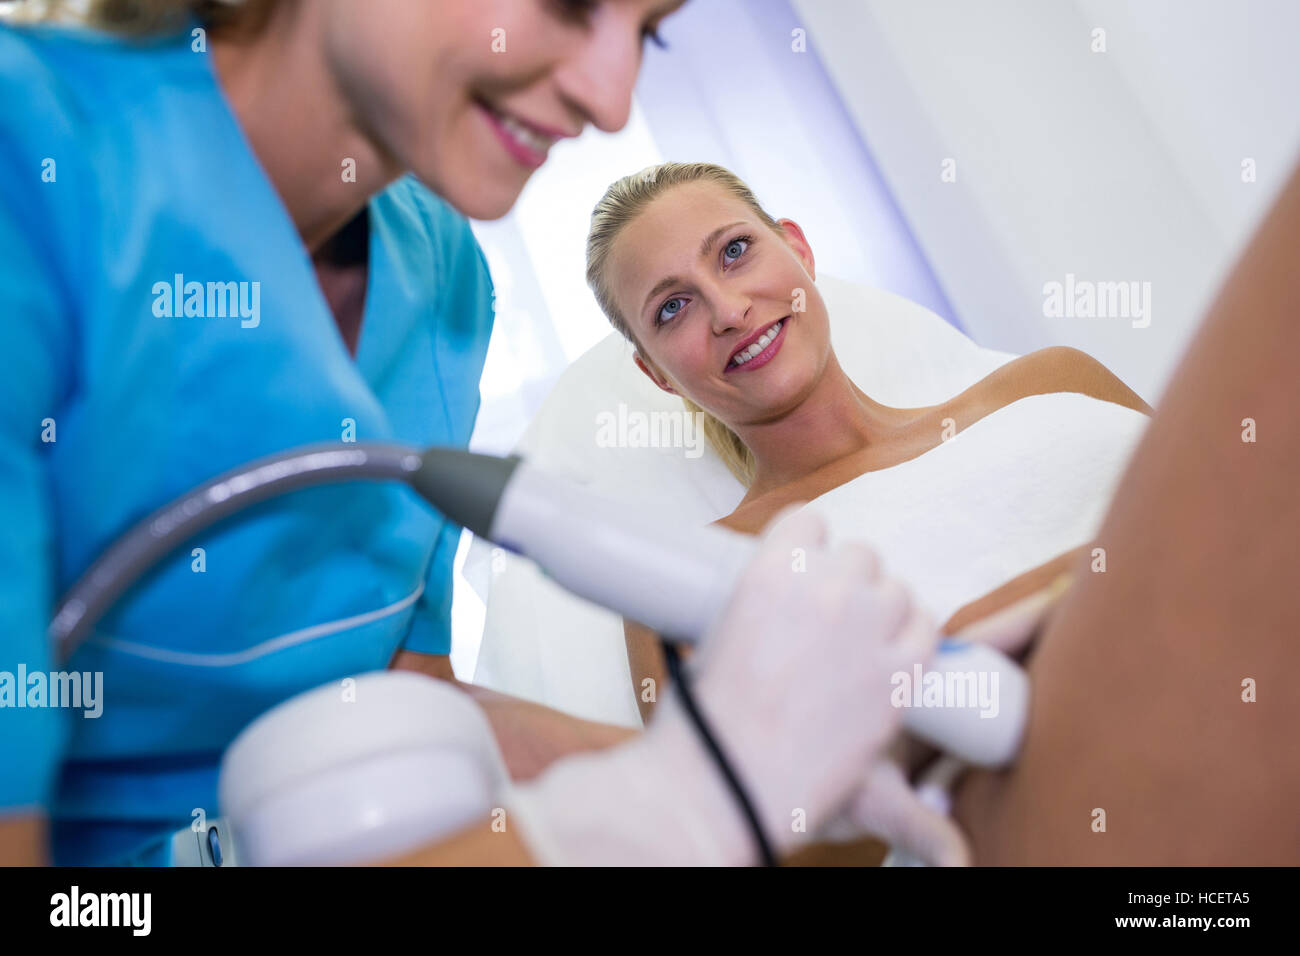 Woman receiving laser epilation treatment on her thigh Stock Photo